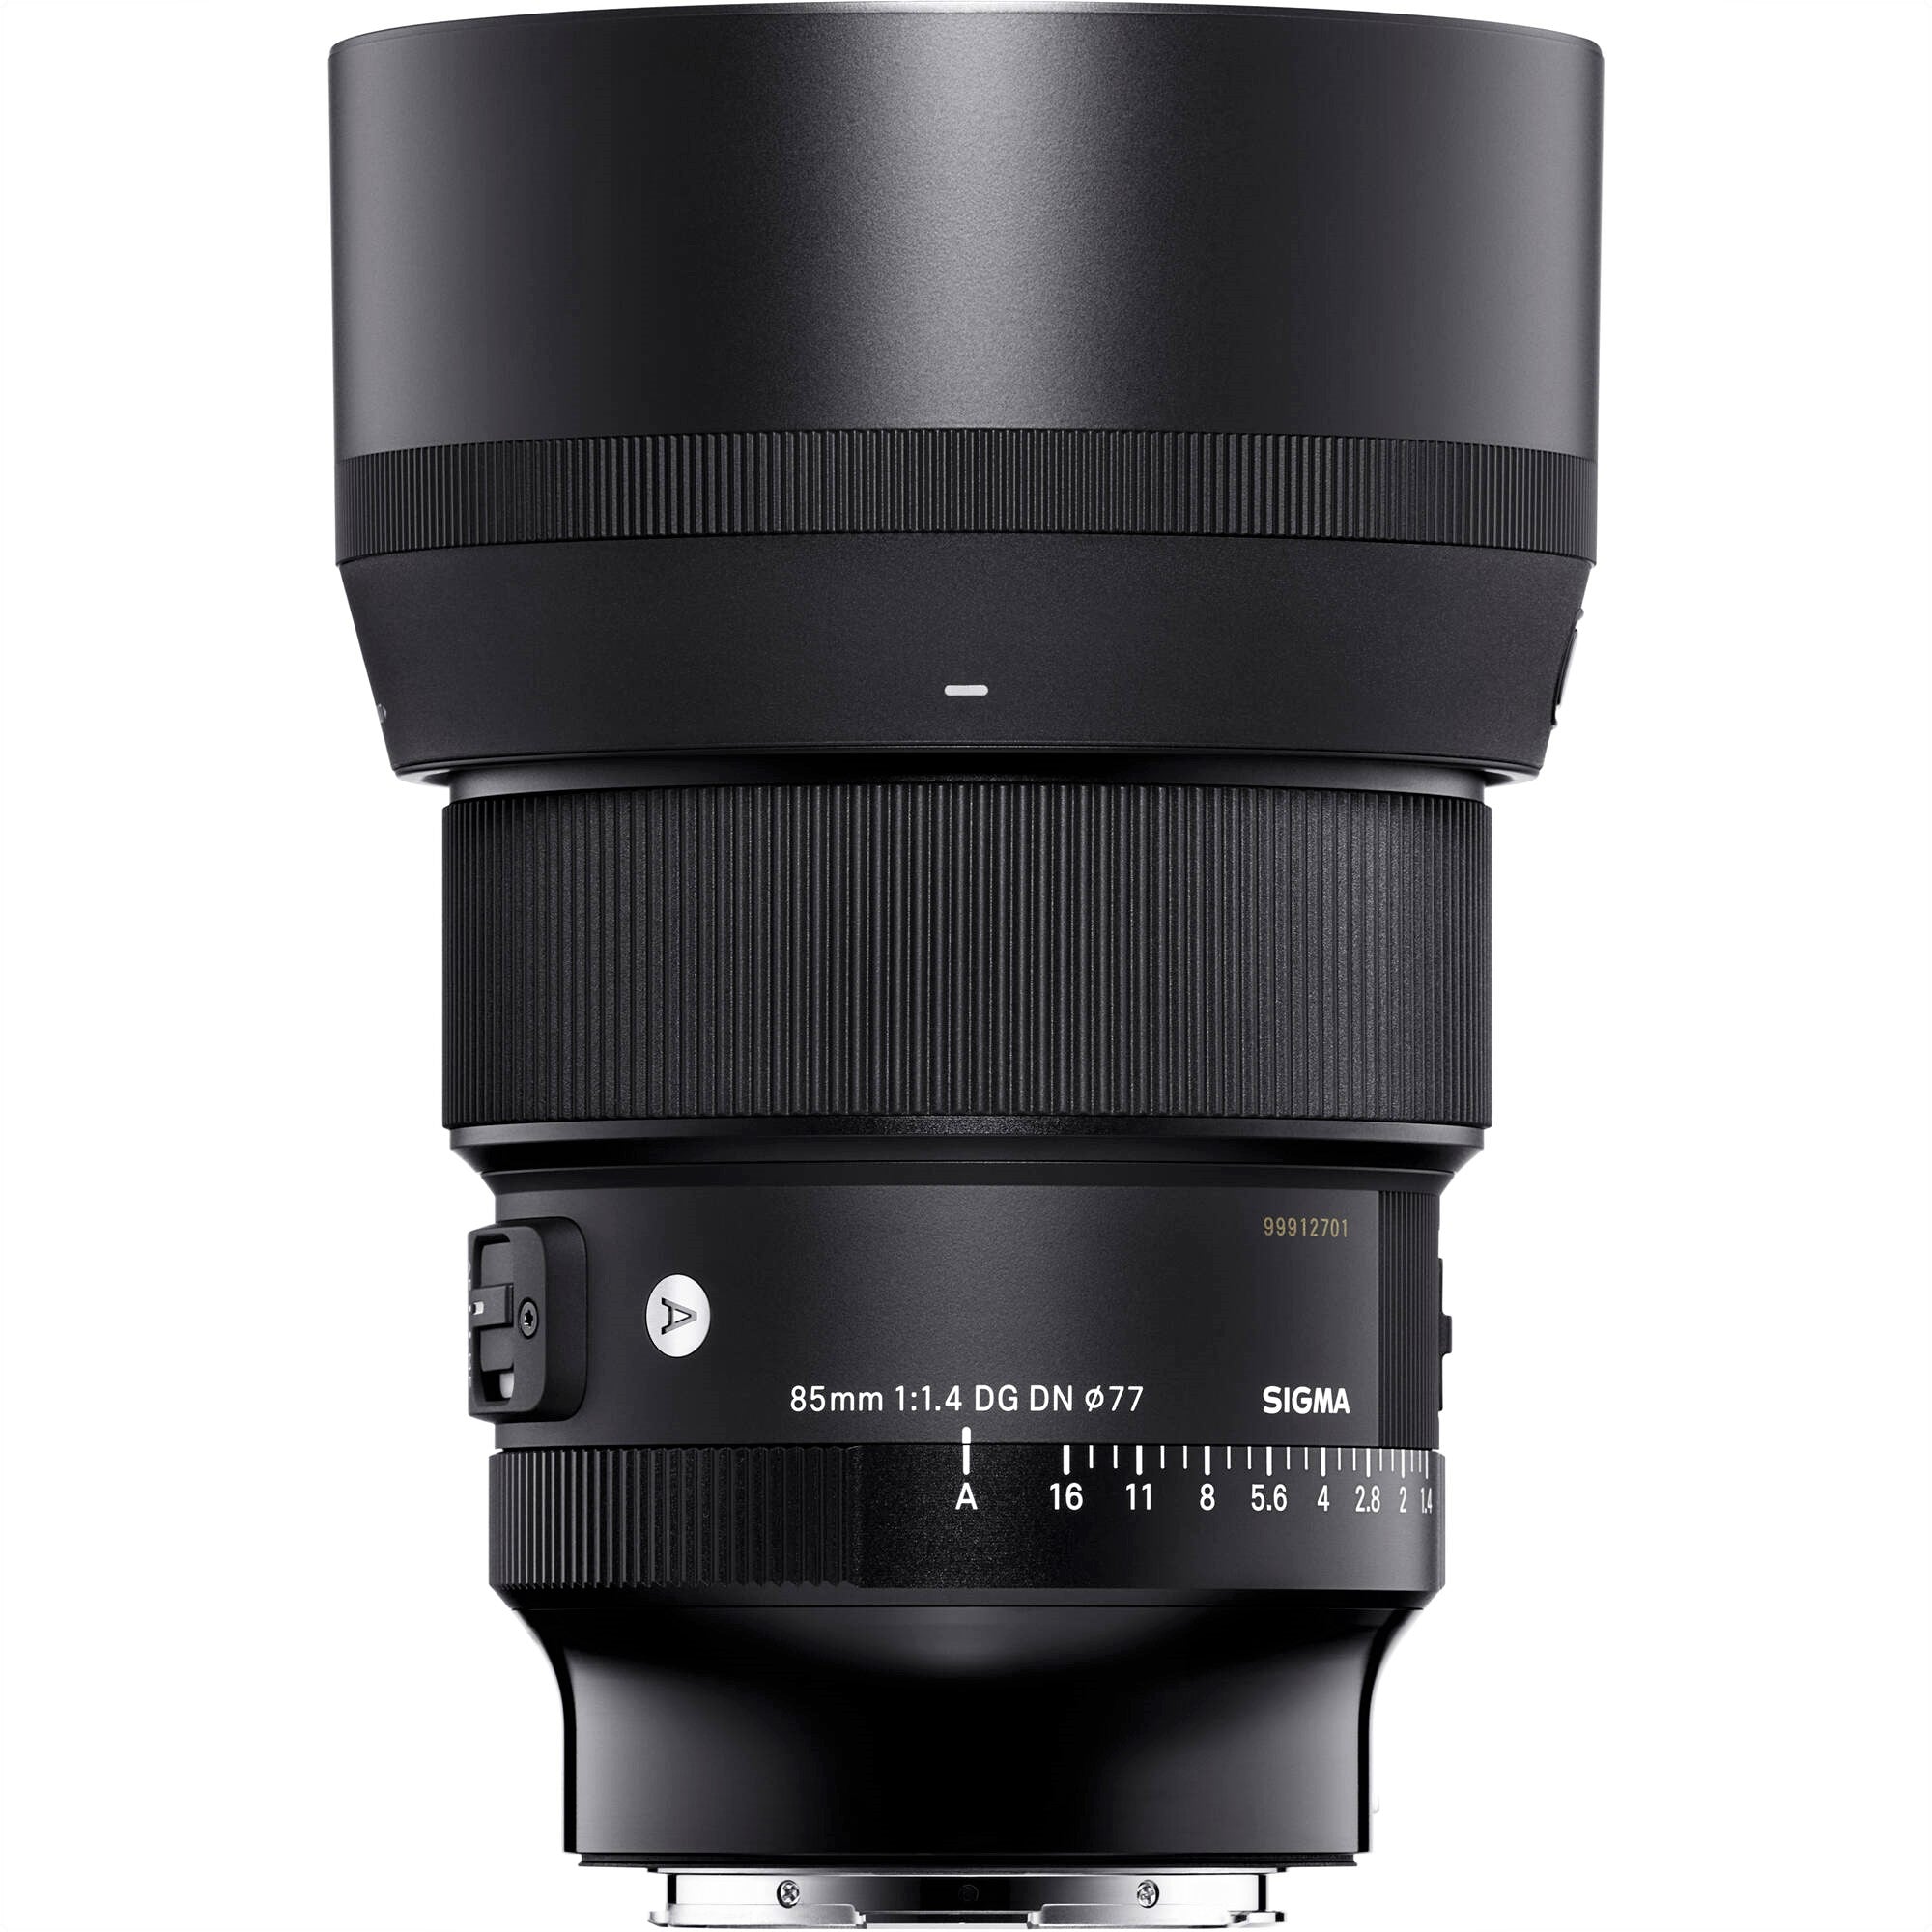 Sigma Lens Hood Attached to 85mm F1.4 DG DN Art Lens